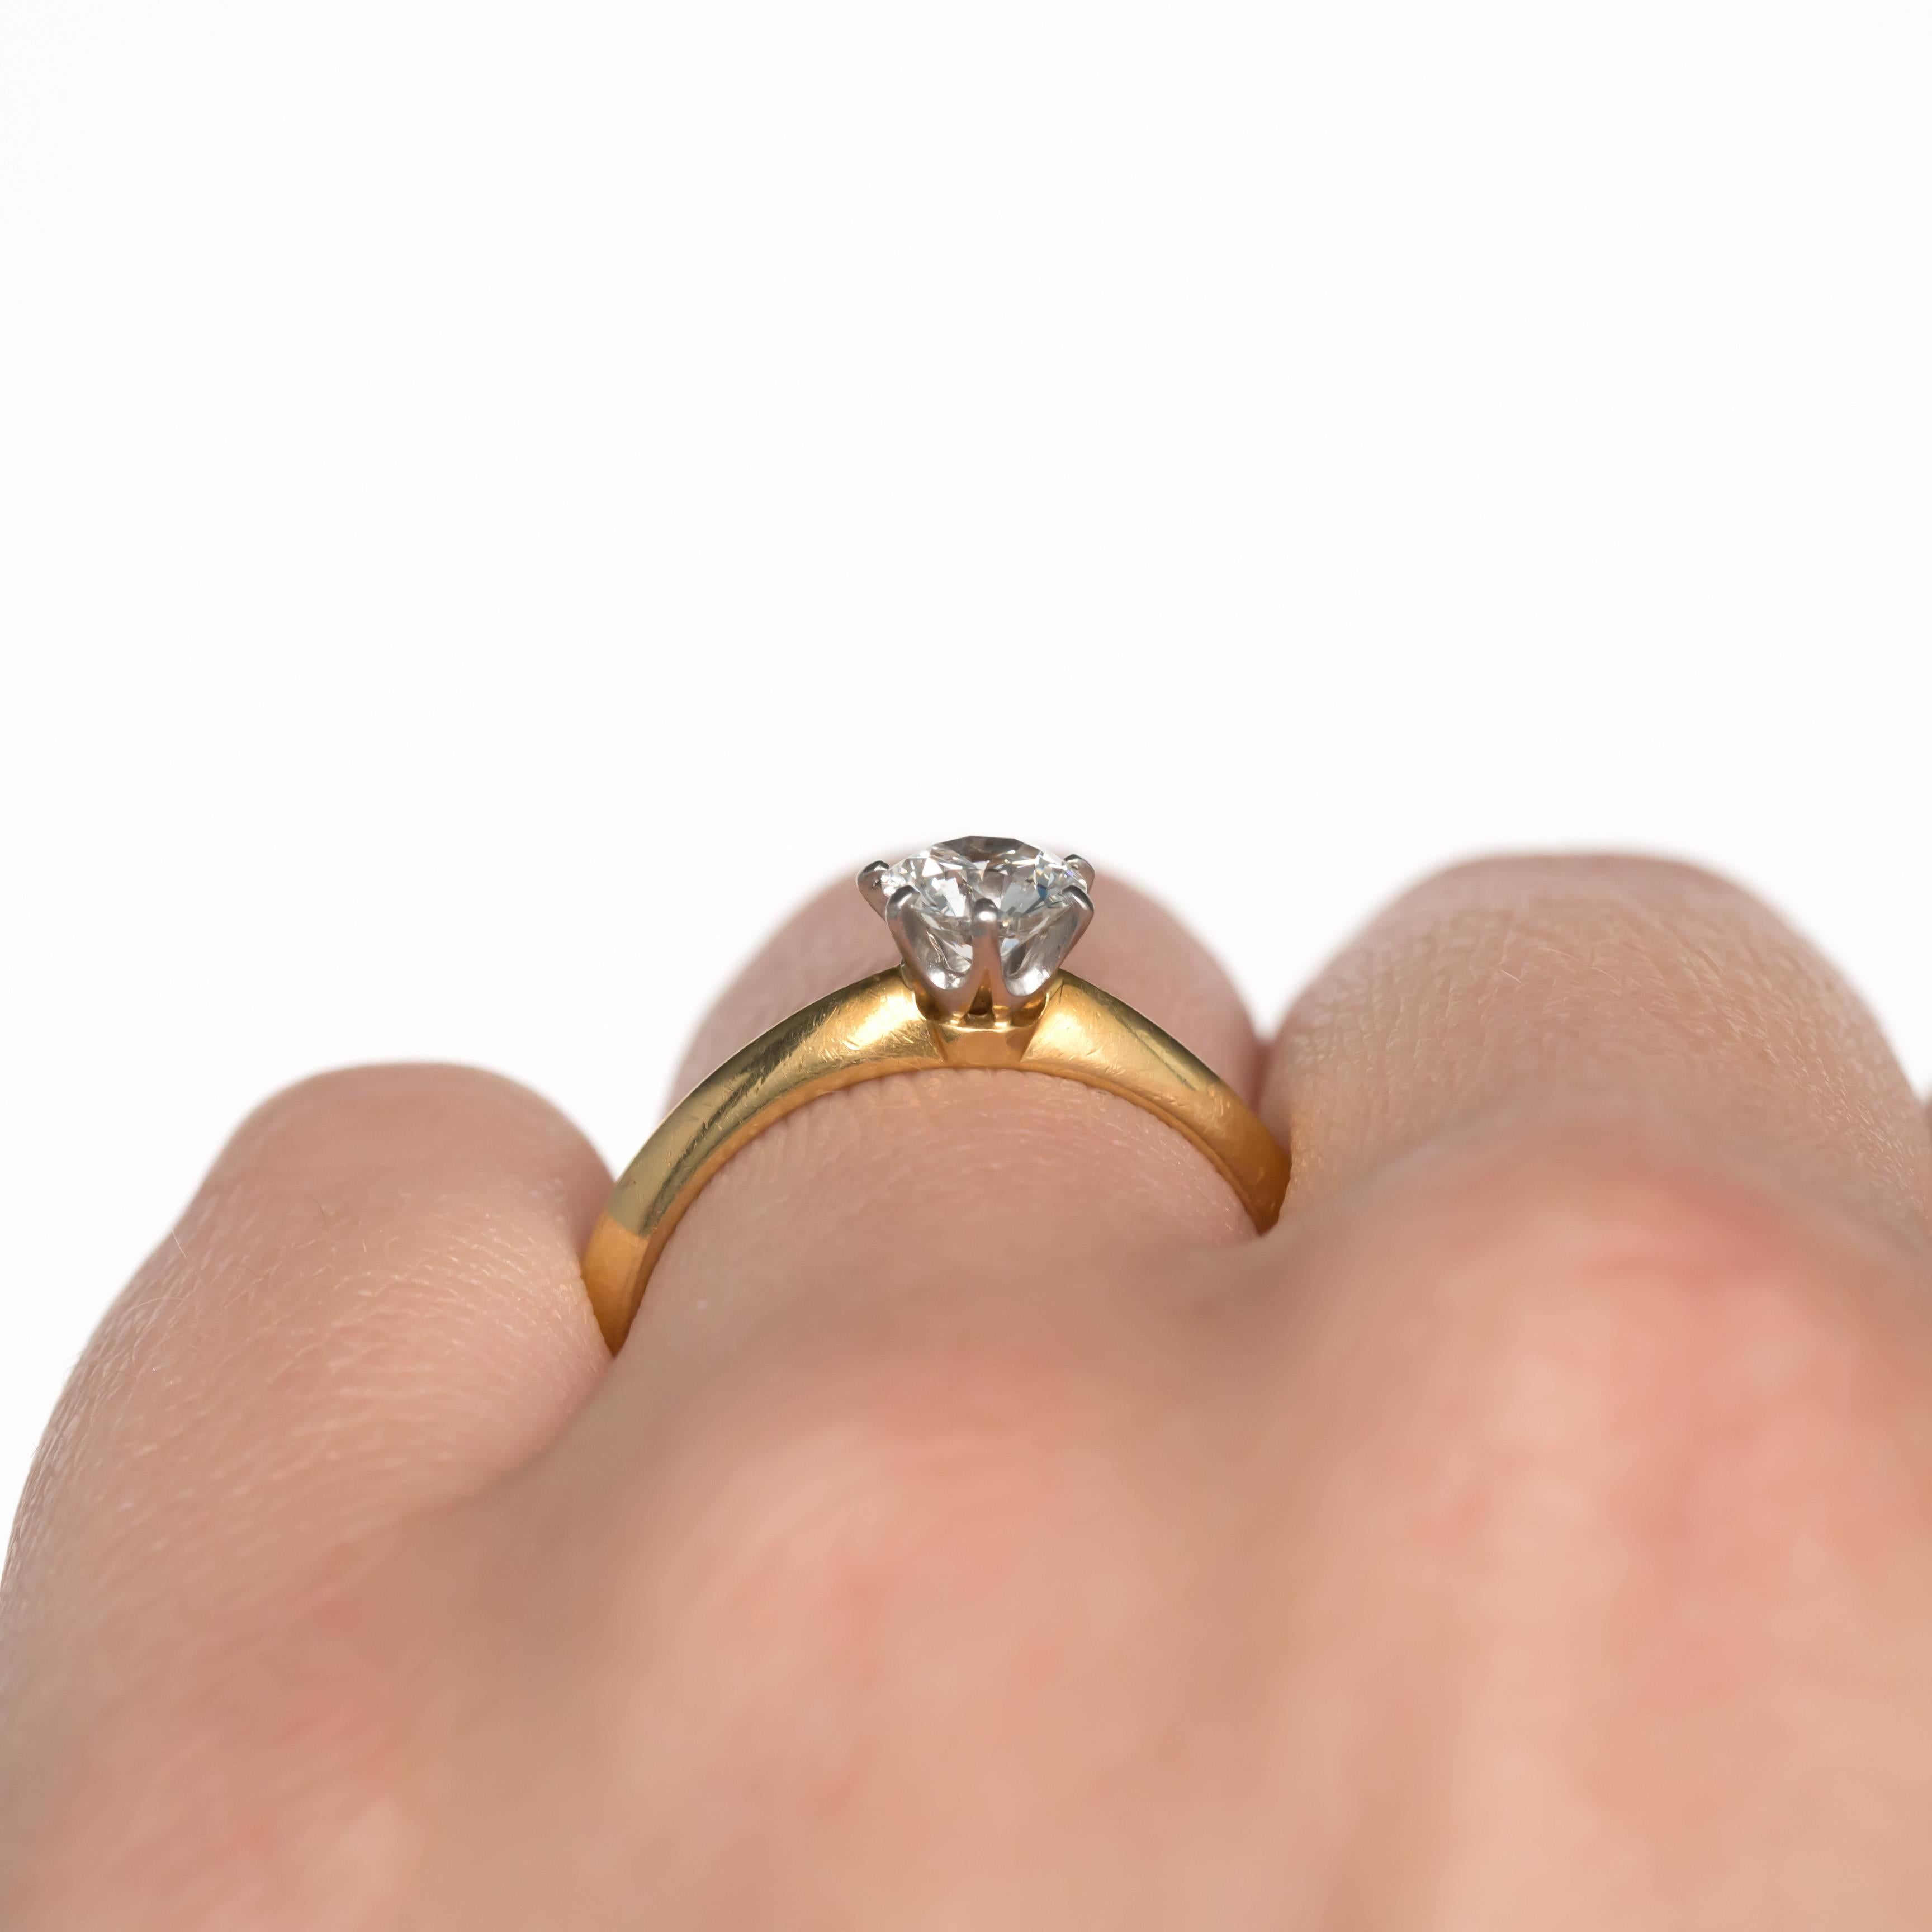 .56 Carat Diamond Yellow and White Gold Tiffany & Co. Engagement Ring For Sale 3